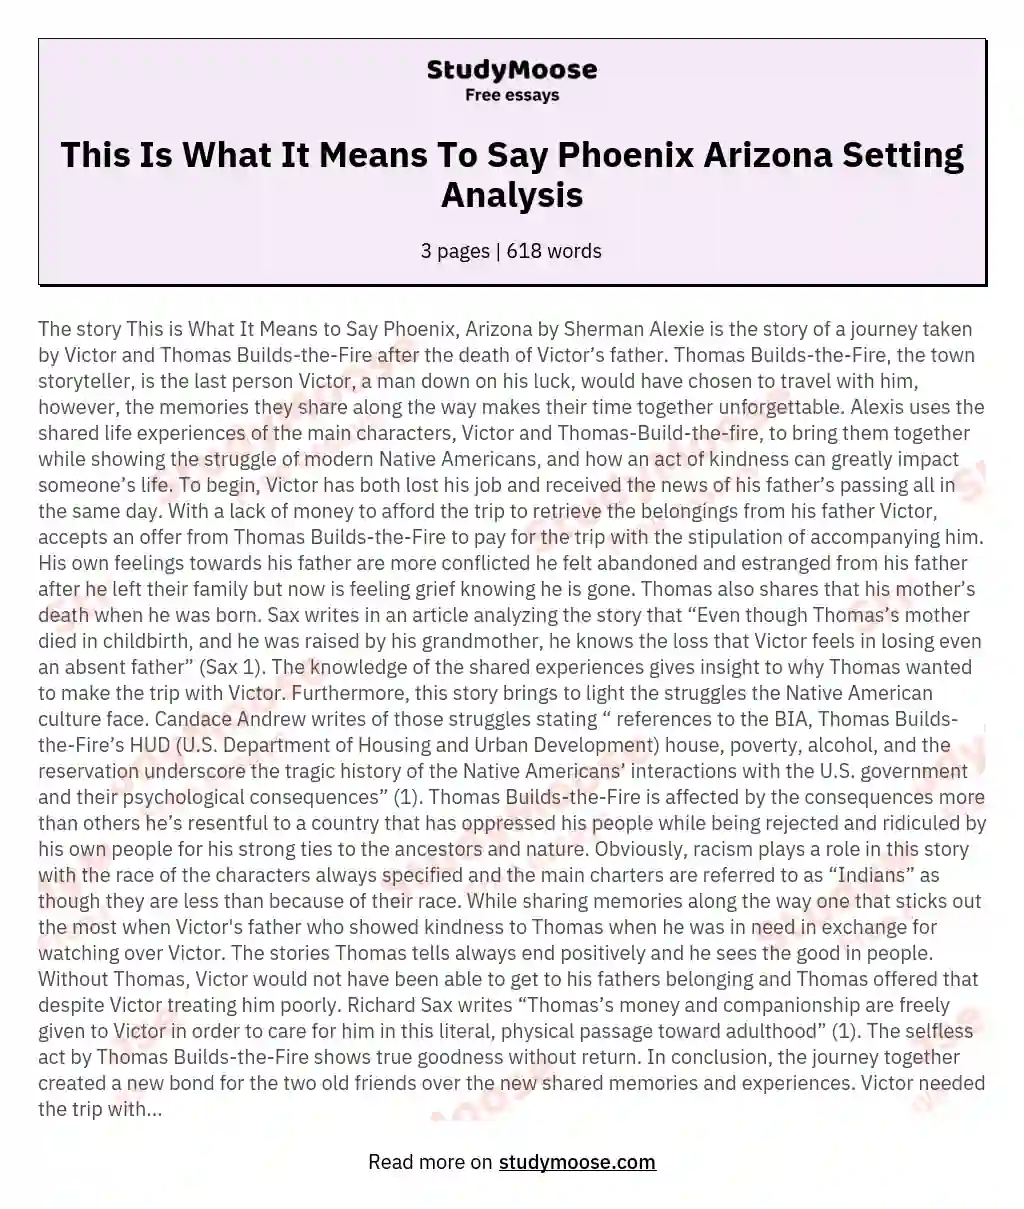 This Is What It Means To Say Phoenix Arizona Setting Analysis